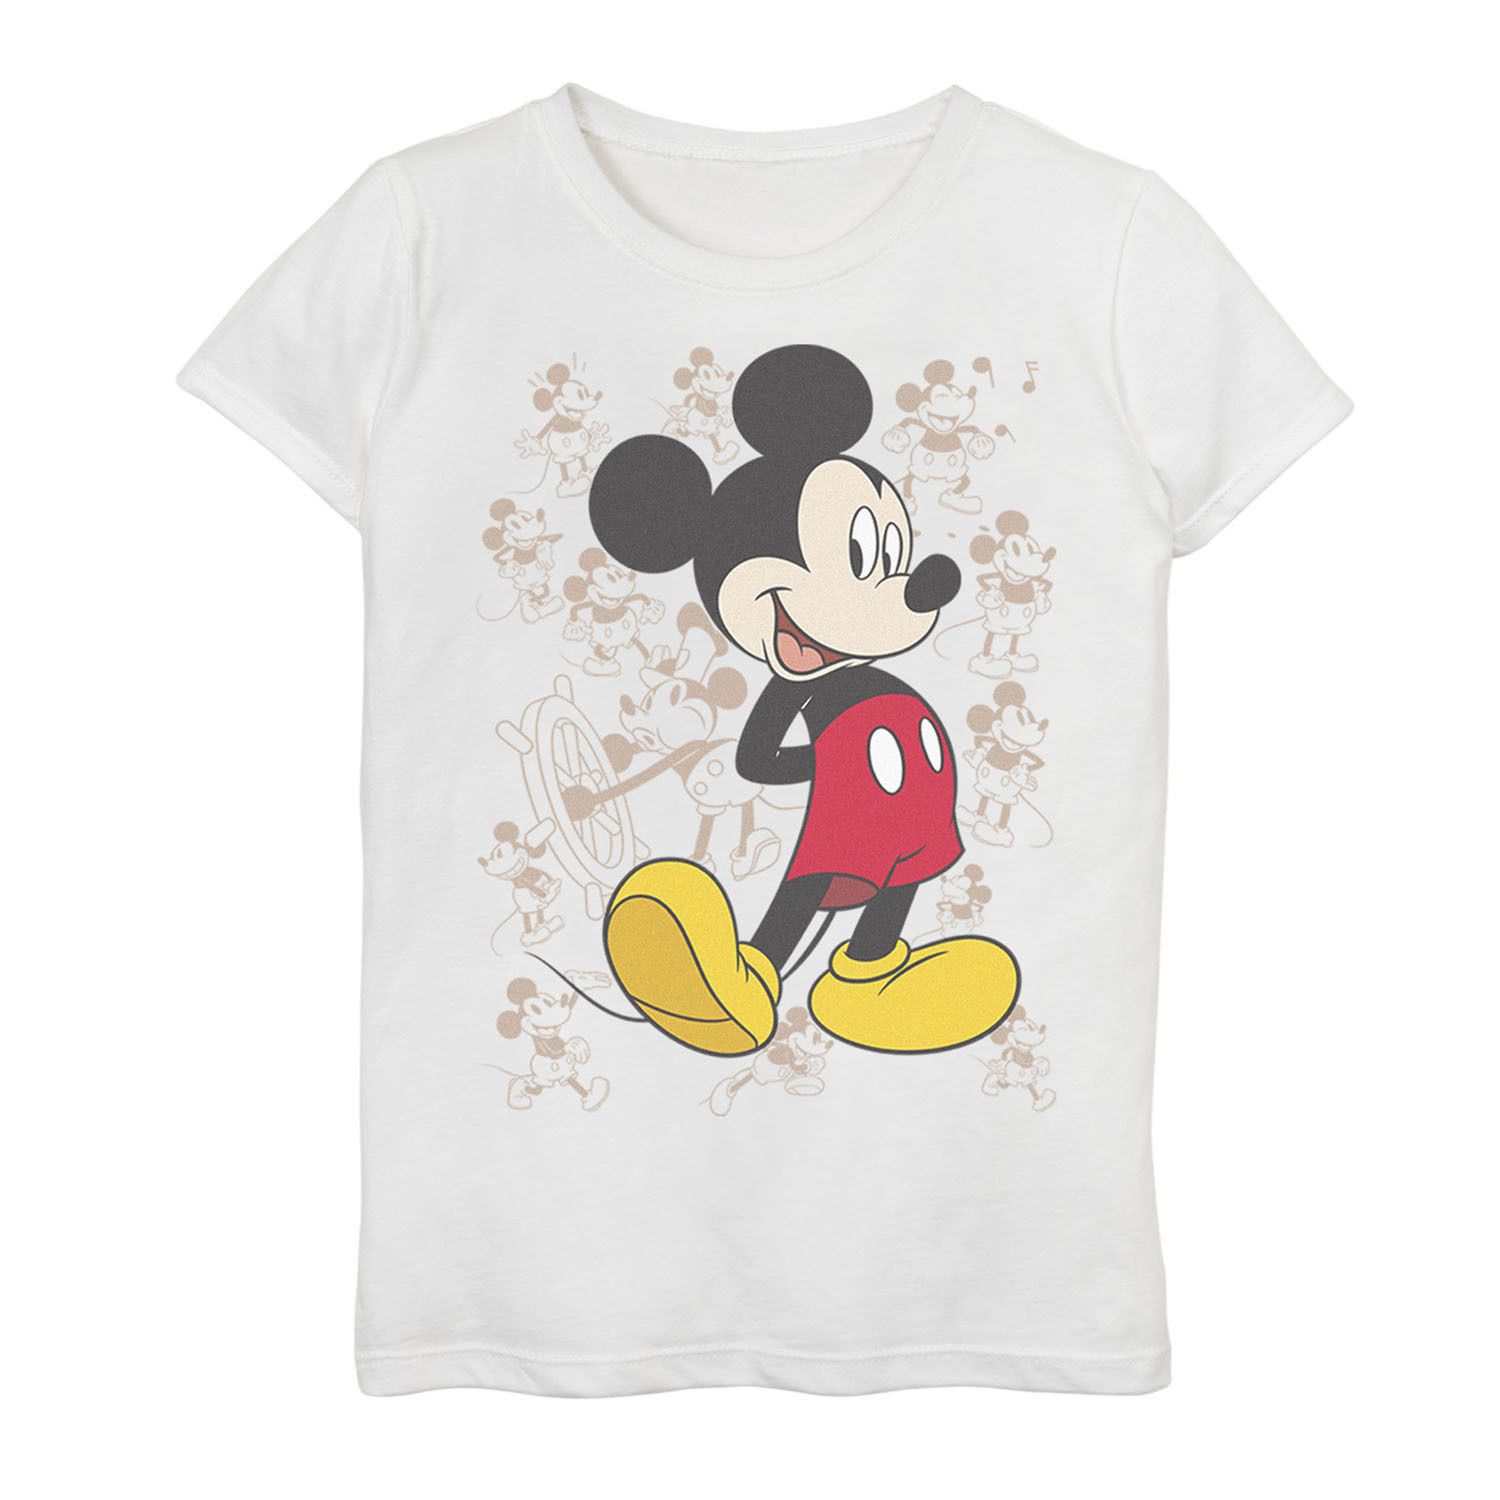 Image for Disney 's Mickey Mouse Girls 7-16 Many Mickeys Background Graphic Tee at Kohl's.